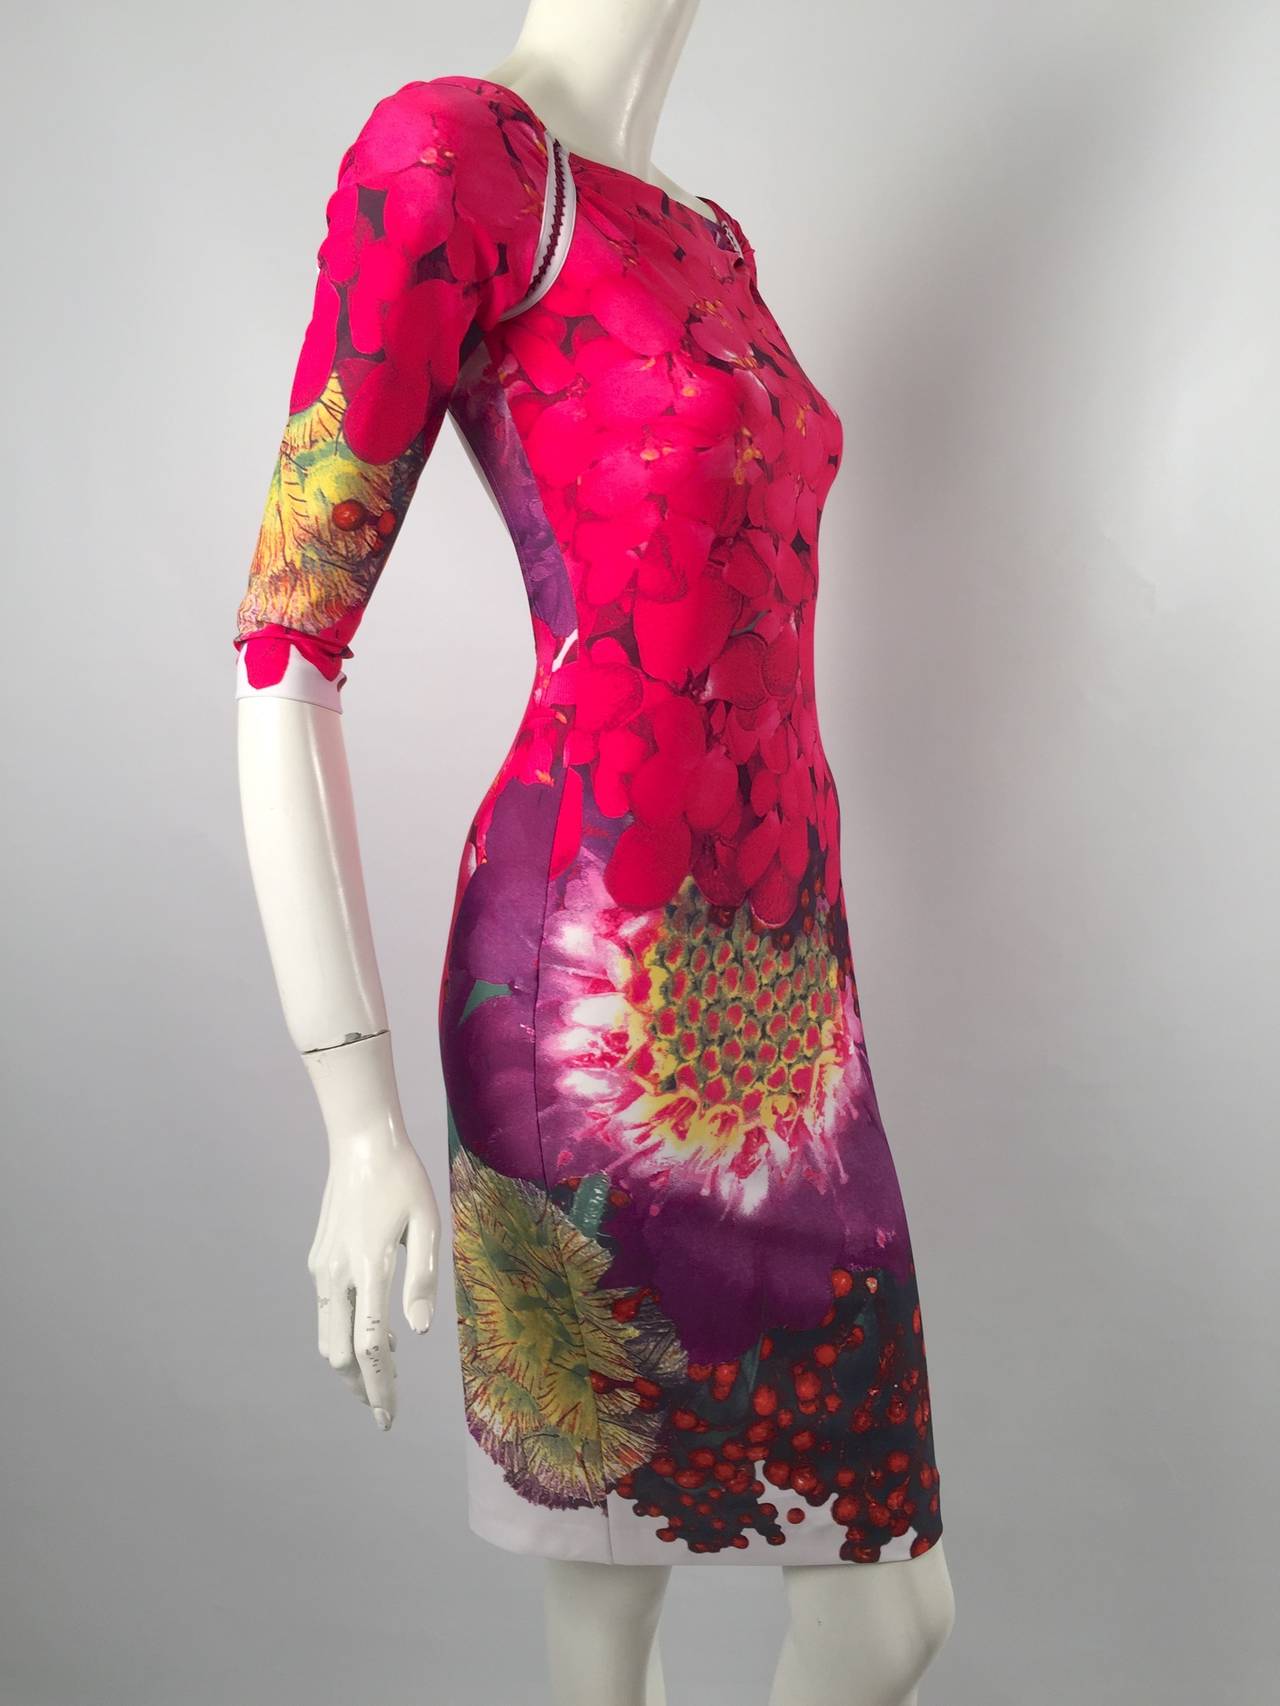 Brand New Wild Berry Print Dress is typically Roberto Cavalli!  Body conscious?  Of course!  Features stretch fabric with rich and colorful print.  Elbow length sleeves are attached to the body of the dress with knit detail.  The piece de